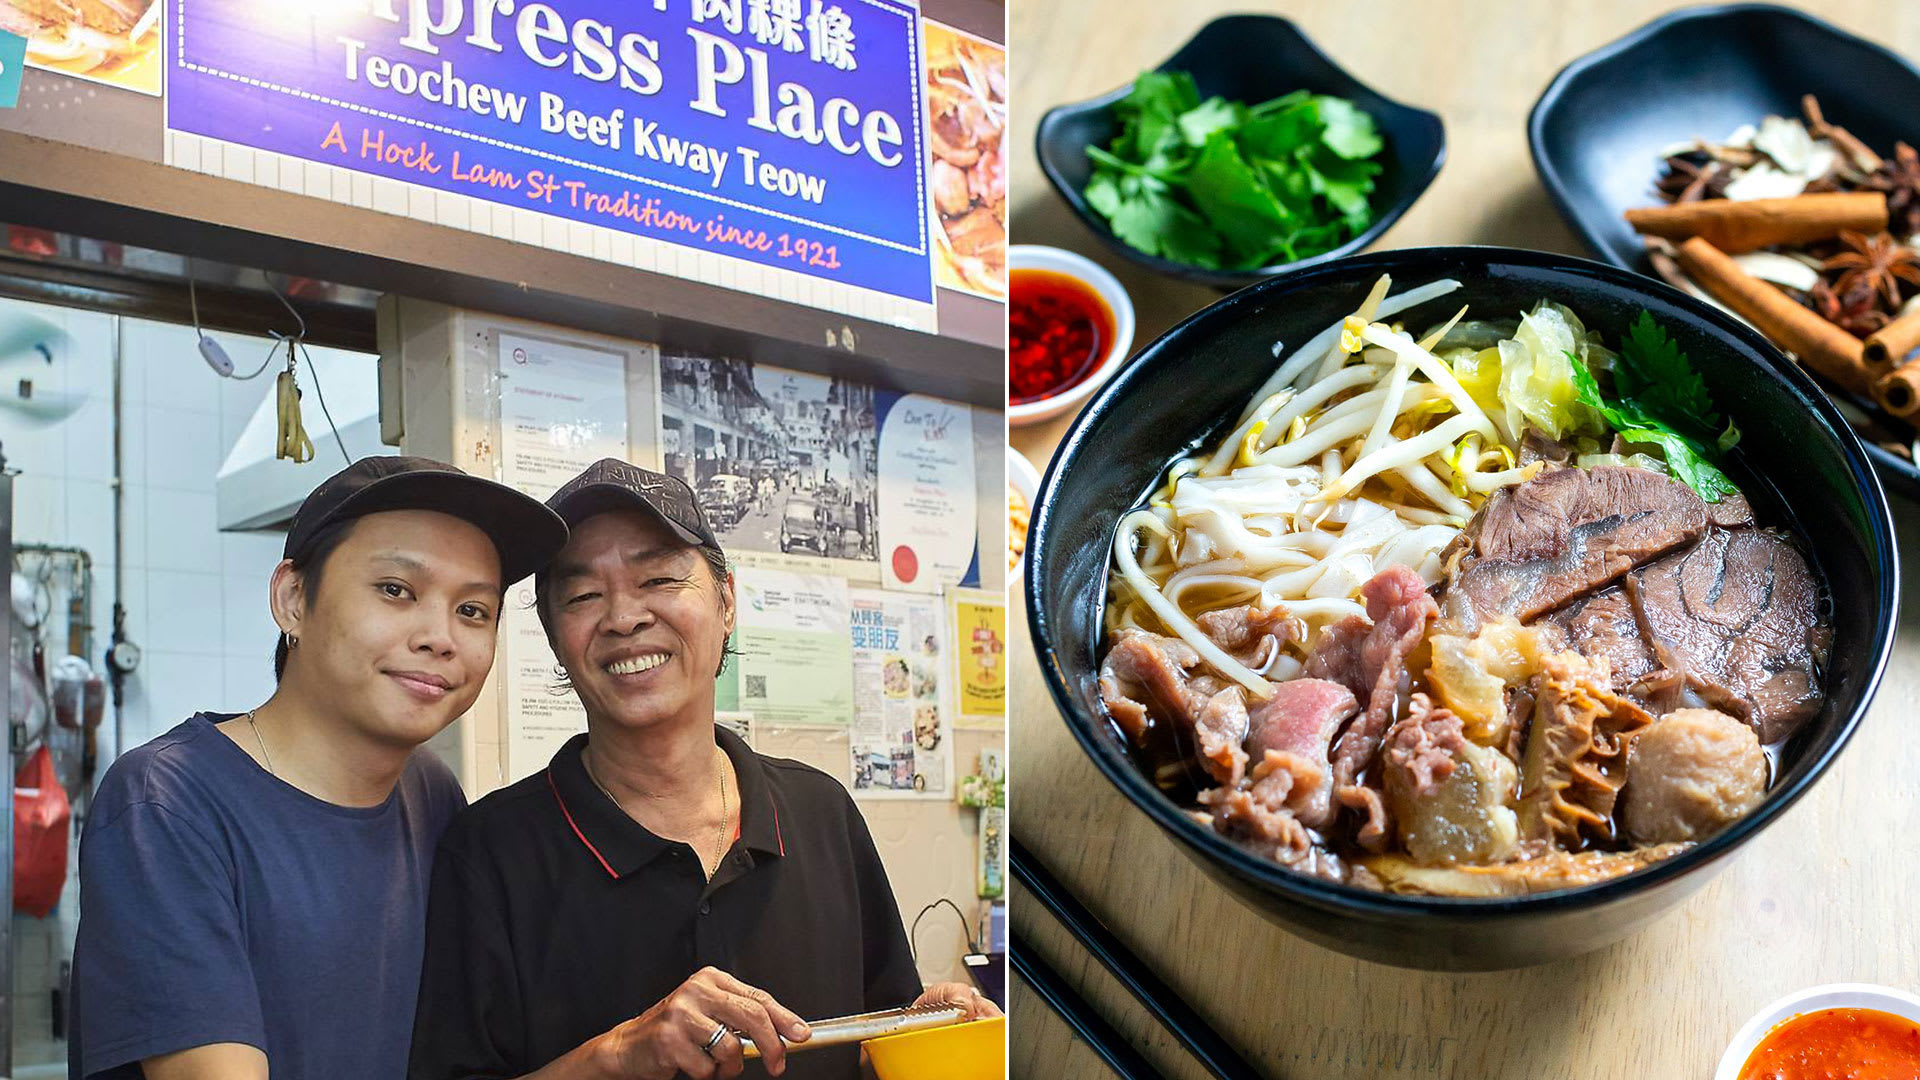 Second Empress Place Teochew Beef Kway Teow Spin-Off Stall Closes Due To Rental Woes